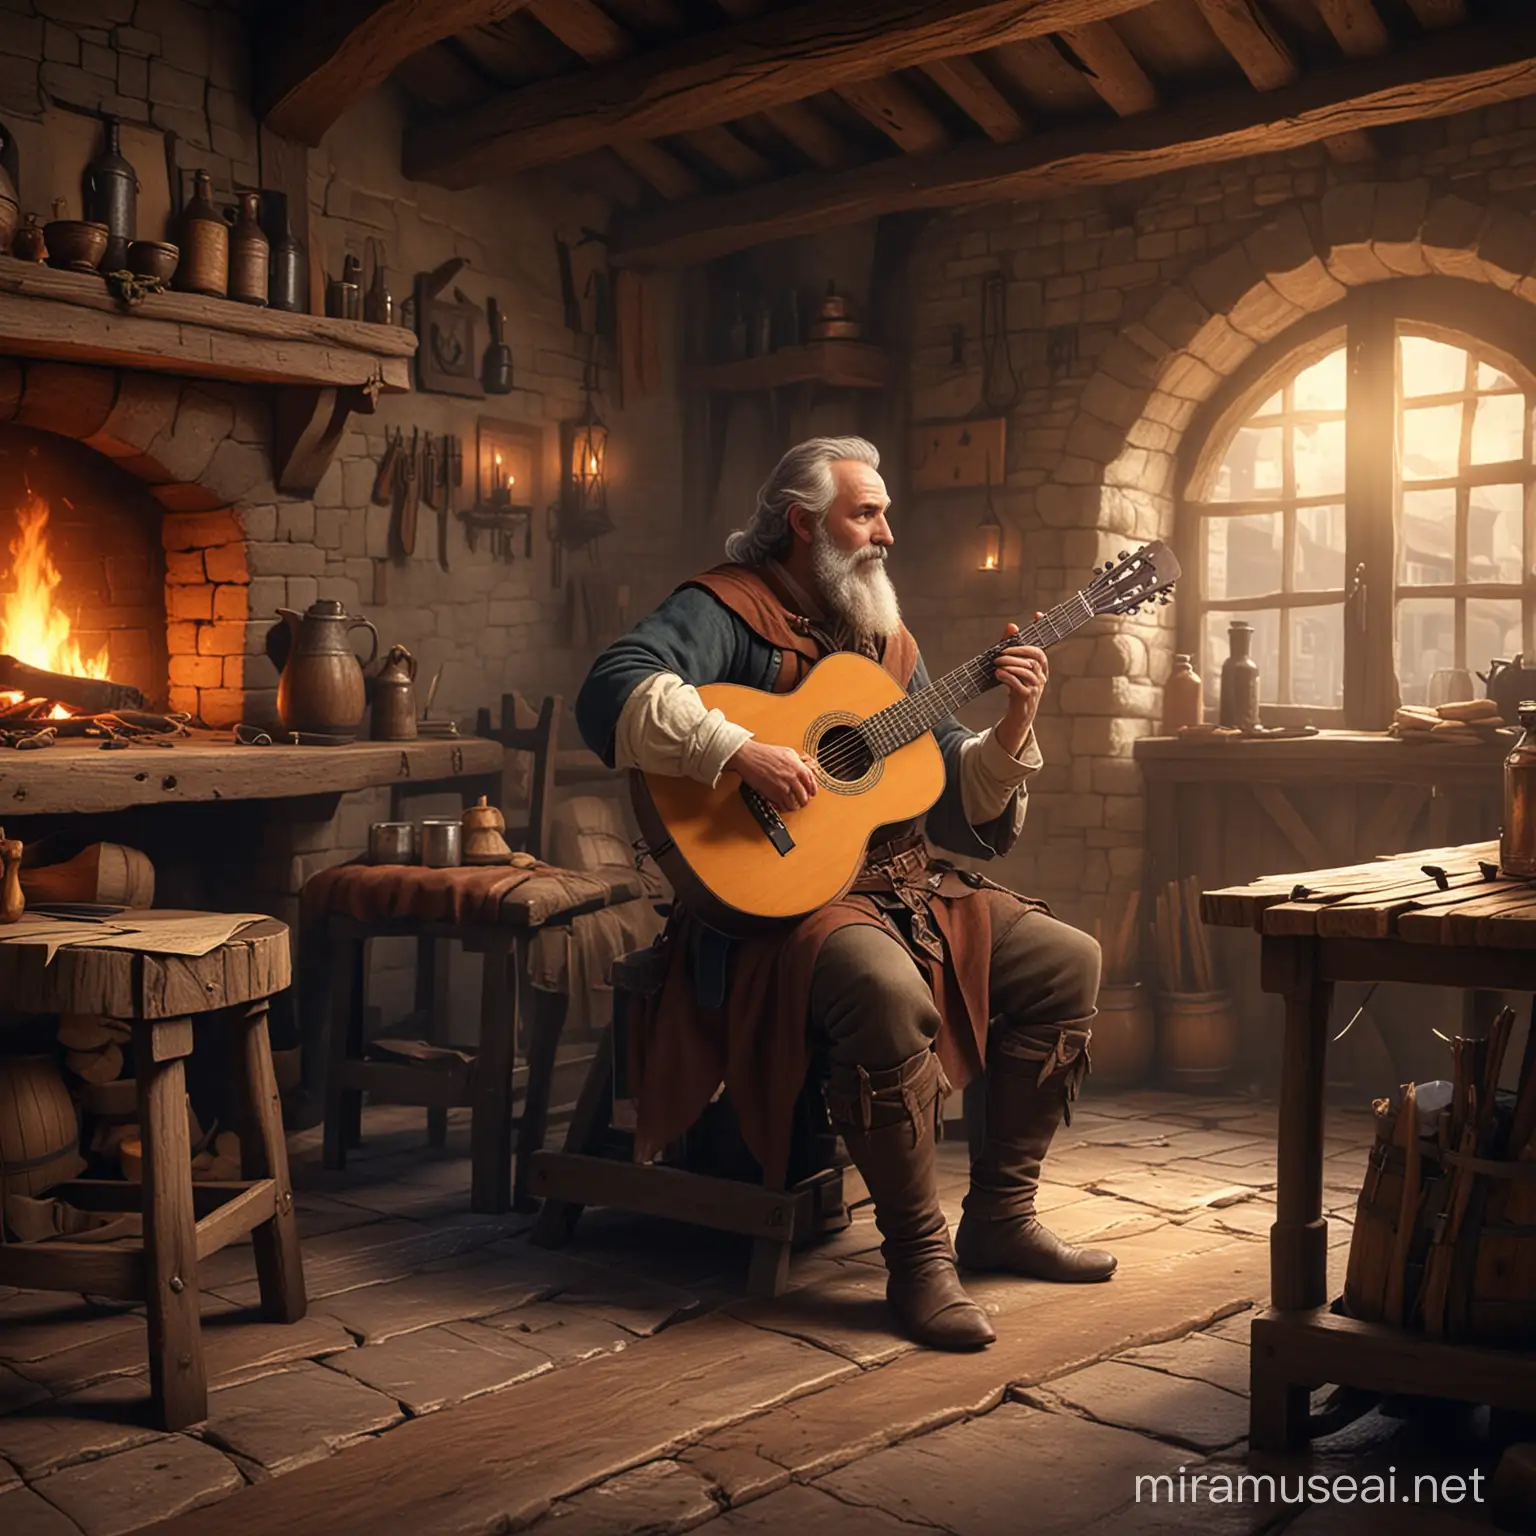 Middle aged bard playing classical guitar in medieval tavern by the hearth  concept art
